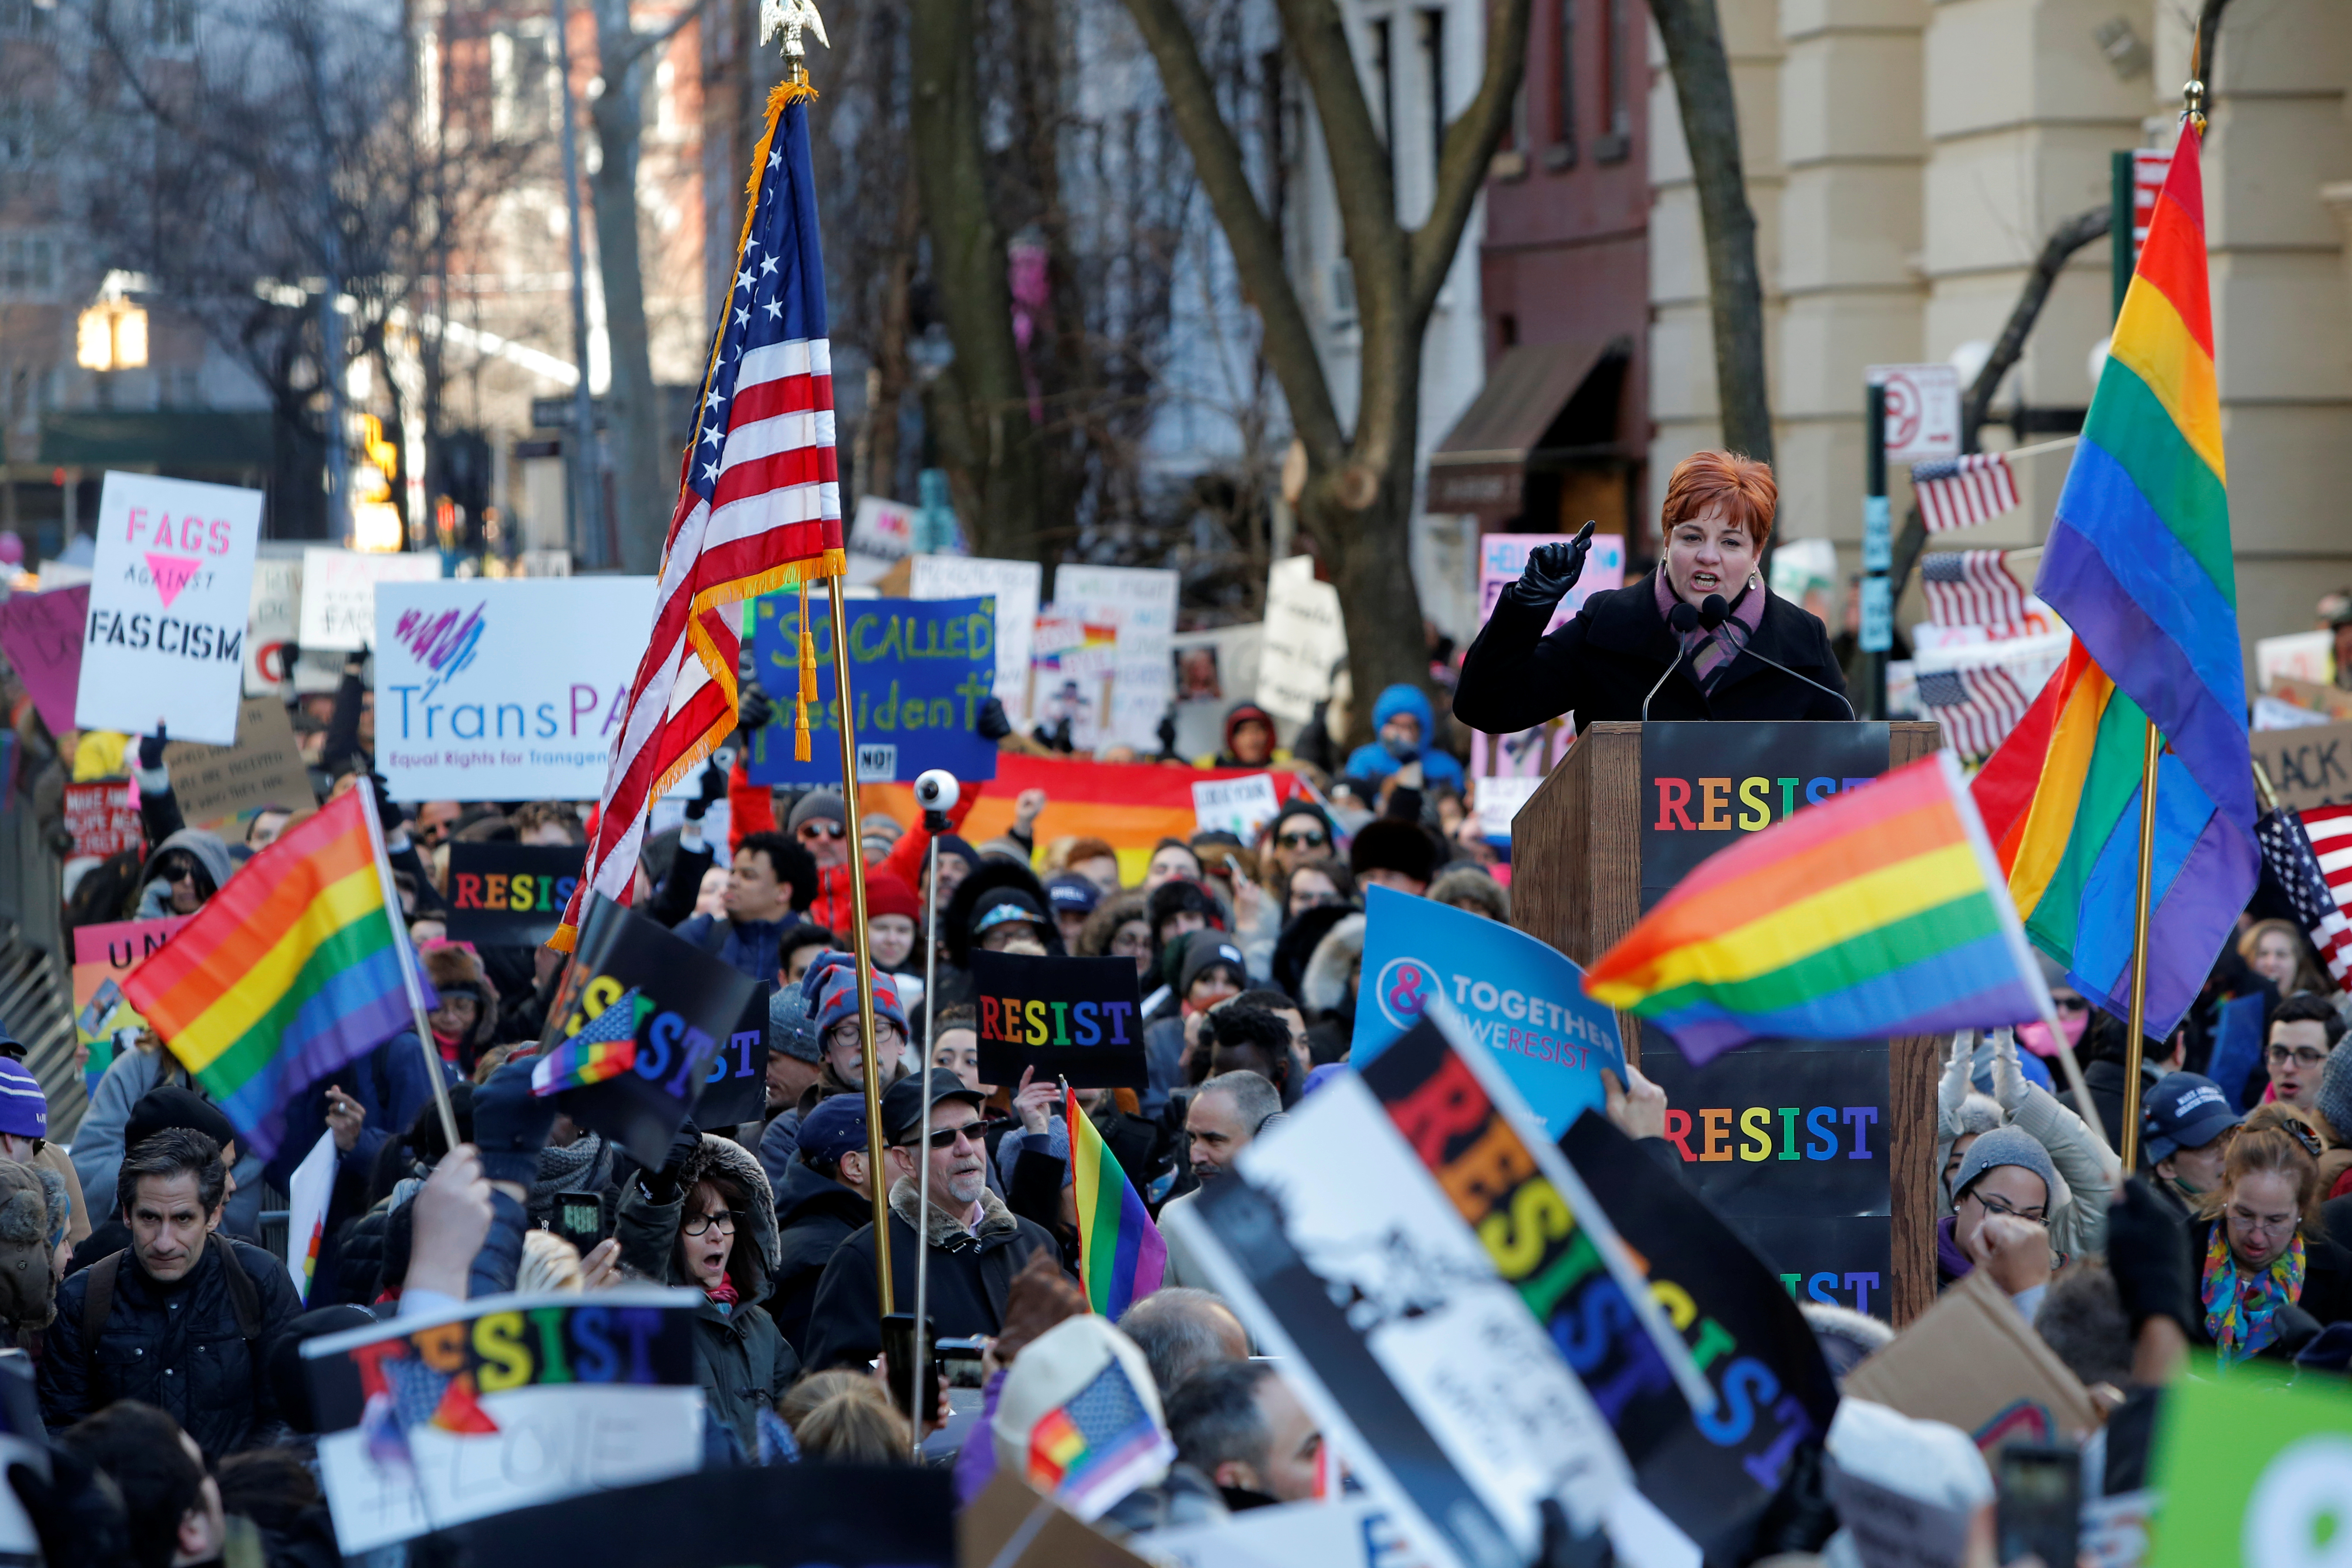 Former Speaker of the New York City Council Christine Quinn addresses attendees during a gathering of the LGBTQ community and supporters protesting U.S. President Donald Trump's agenda in Manhattan, New York, U.S., February 4, 2017. REUTERS/Andrew Kelly - RC1CBED31C90